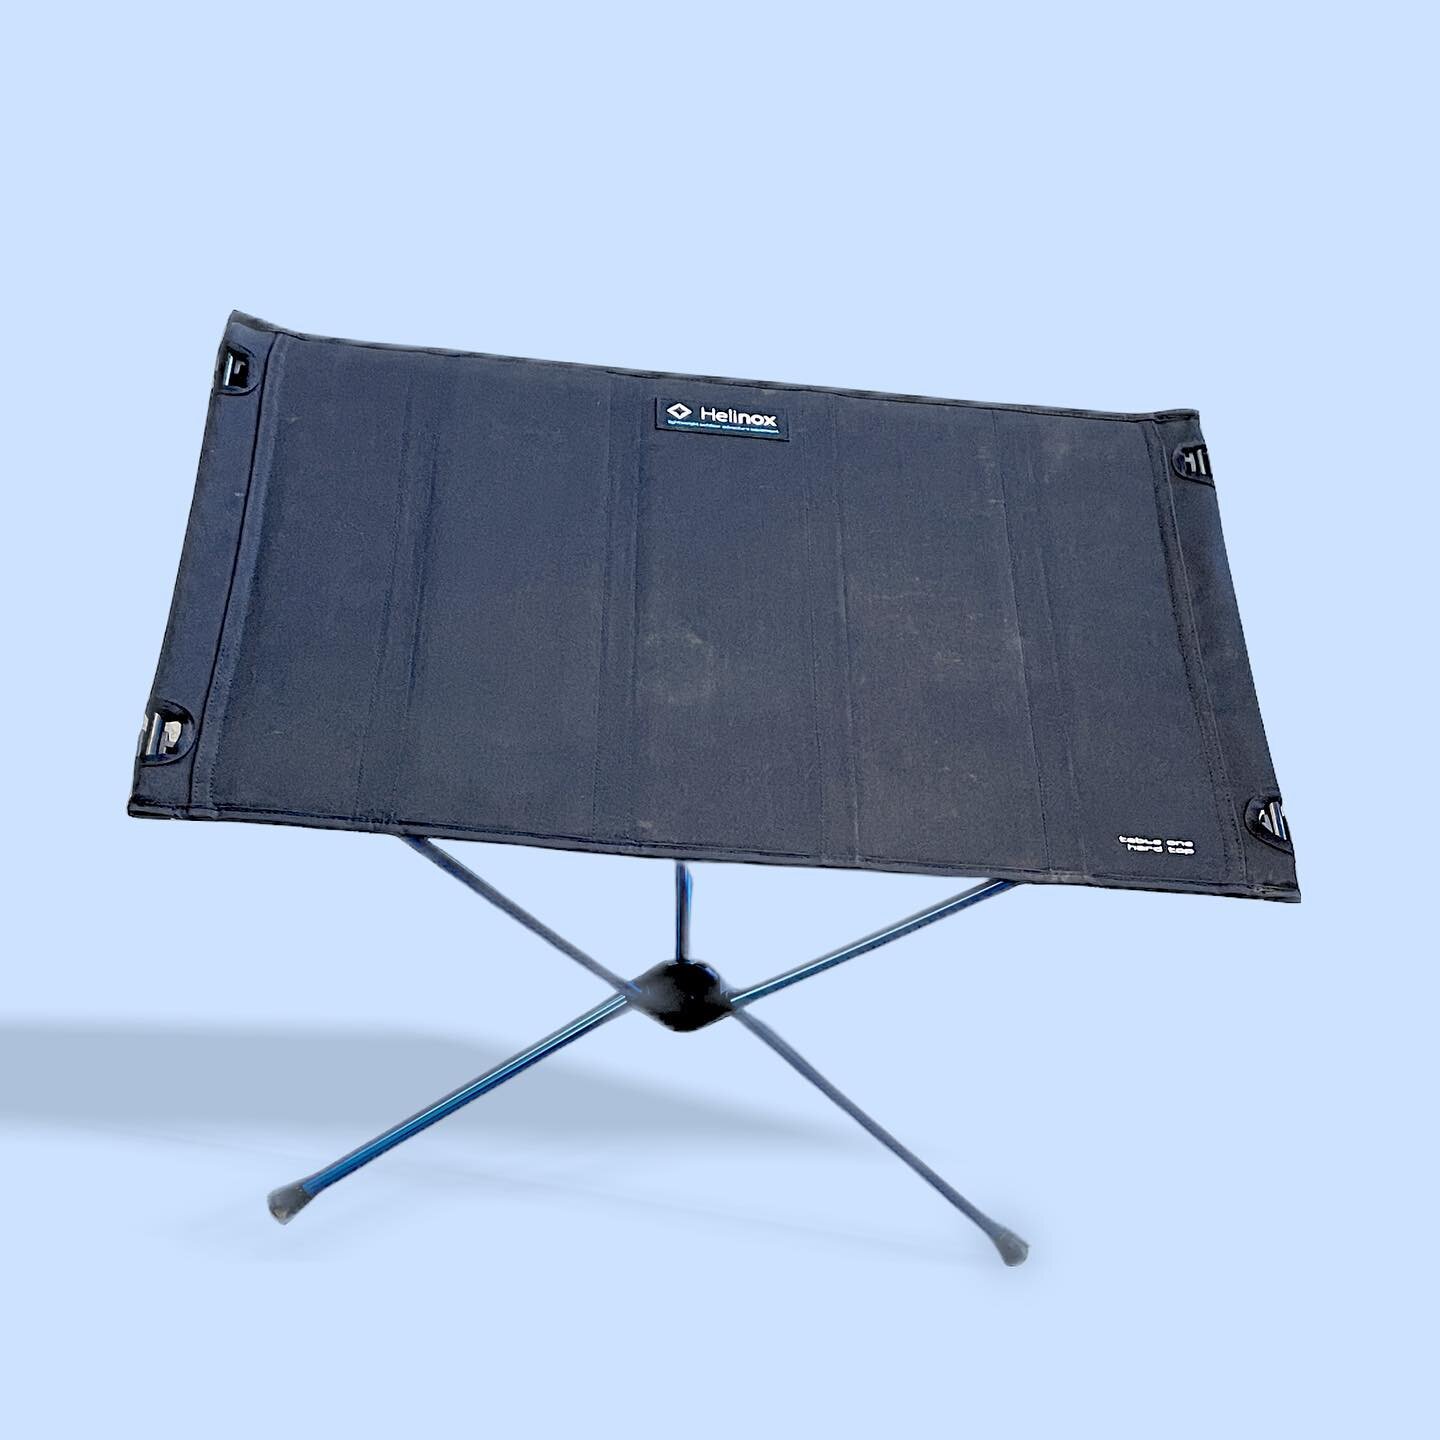 Helinox Ultralight Camping Table
Less than 2lbs assembled!

MSRP: $149
CC: $74